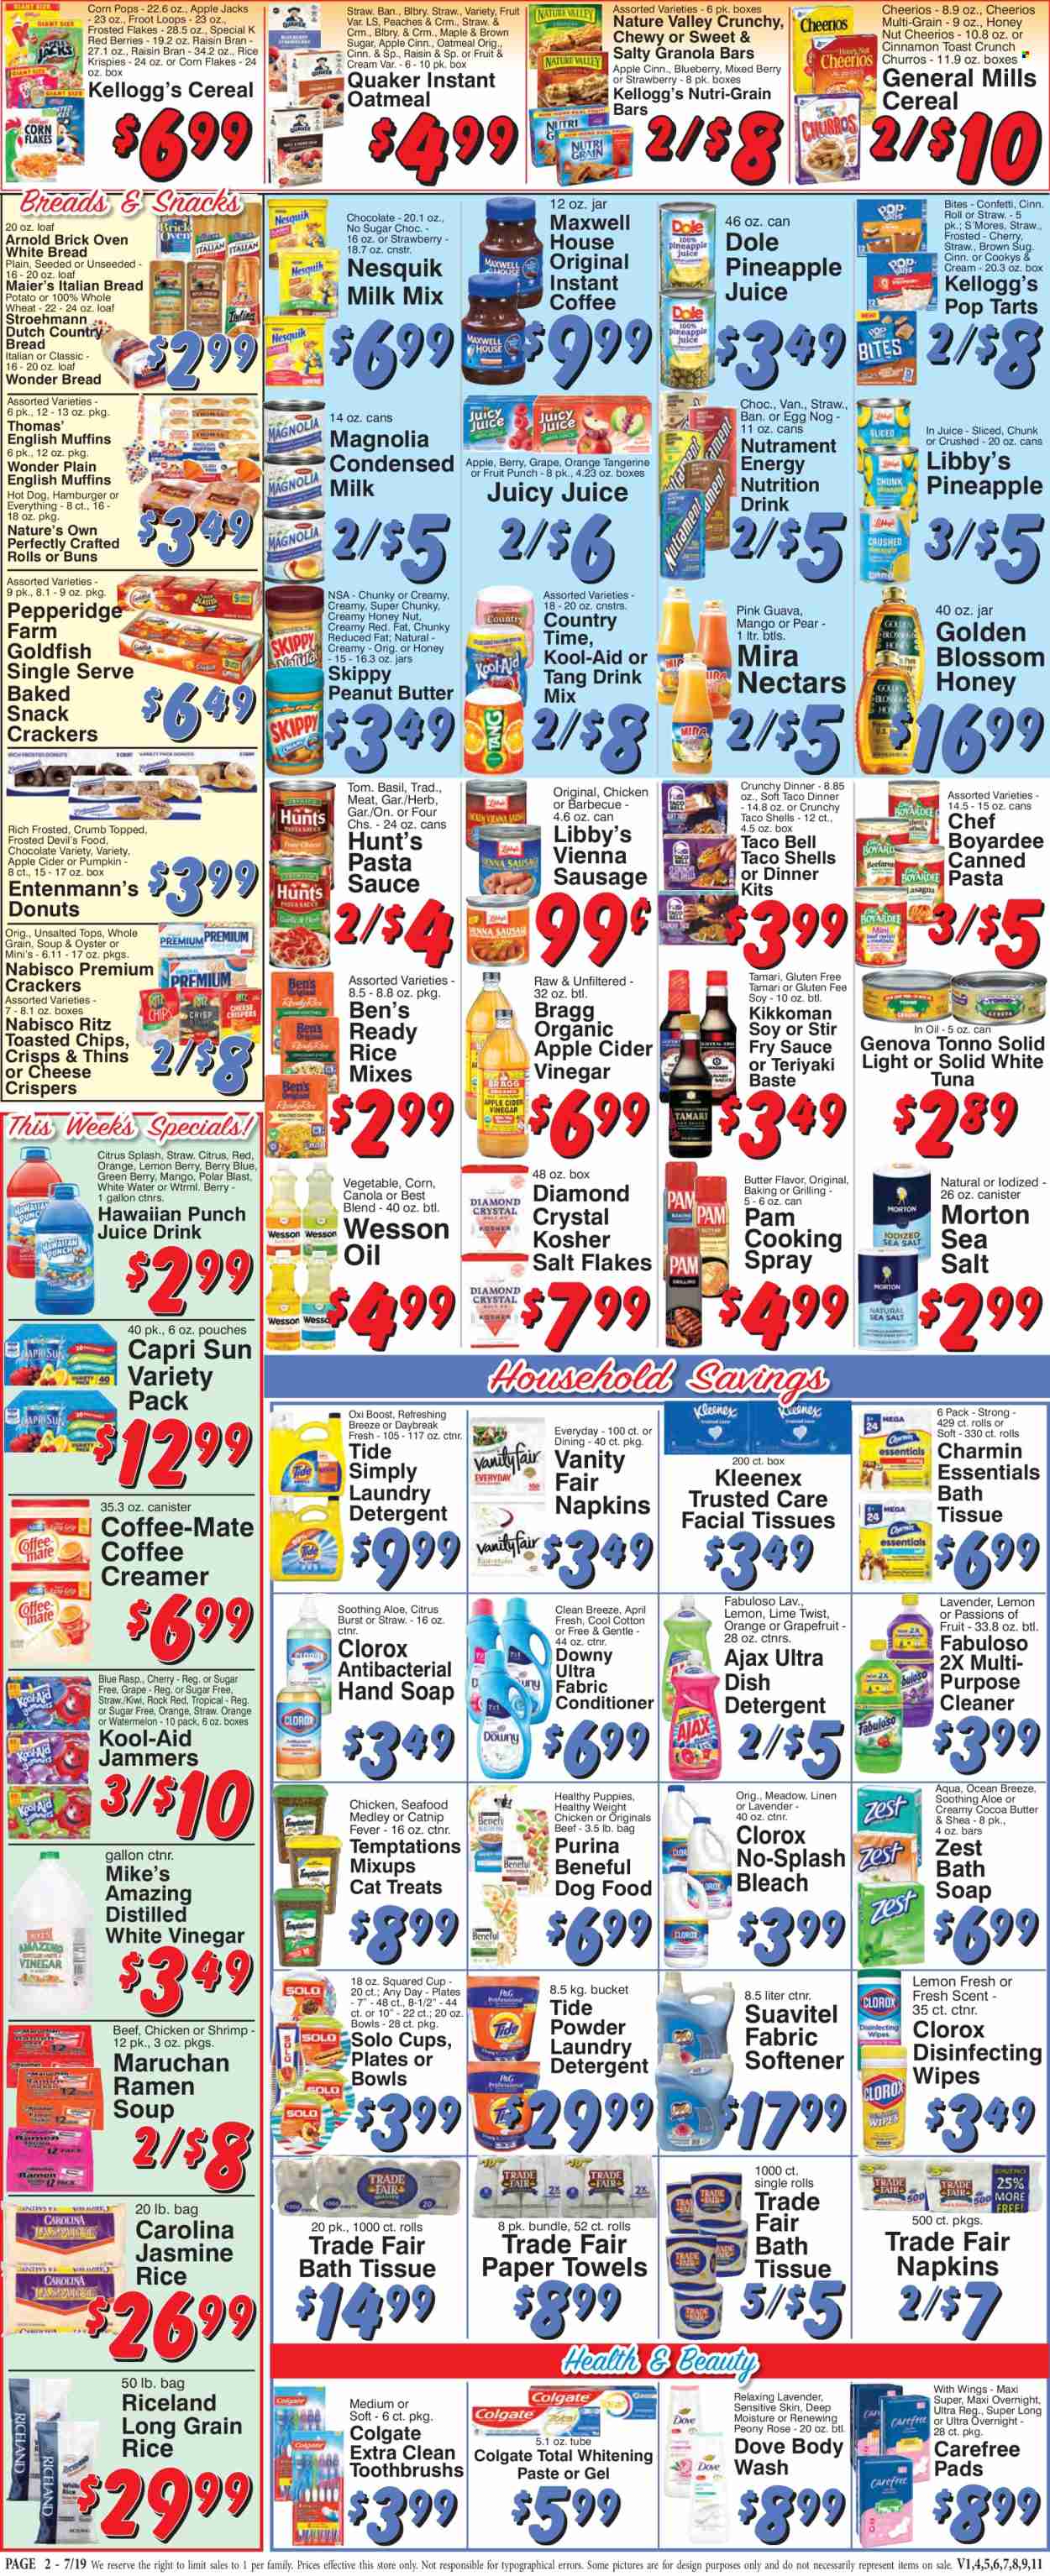 thumbnail - Trade Fair Supermarket Flyer - 07/19/2024 - 07/25/2024 - Sales products - bread, english muffins, white bread, buns, tacos, churros, Entenmann's, Dole, grapefruits, guava, mandarines, peaches, seafood, shrimps, ramen, hot dog, pasta sauce, soup, snack, hamburger, instant noodles, dinner kit, Quaker, spaghetti sauce, ready meal, sausage, vienna sausage, Nesquik, snack bar, Coffee-Mate, condensed milk, creamer, coffee and tea creamer, Dove, cereal bar, crackers, Kellogg's, Pop-Tarts, RITZ, Nabisco, General Mills, Thins, Goldfish, salty snack, crisps, cane sugar, canned tuna, Chef Boyardee, canned fish, cereals, Cheerios, corn flakes, granola bar, Frosted Flakes, Corn Pops, Raisin Bran, Nature Valley, Nutri-Grain, jasmine rice, Kikkoman, apple cider vinegar, cooking spray, Capri Sun, pineapple juice, juice, fruit drink, Country Time, fruit punch, water, Maxwell House, instant coffee, eggnog, cleansing wipes, wipes, napkins, bath tissue, Kleenex, kitchen towels, paper towels, Charmin, pads, detergent, bleach, Clorox, Ajax, Fabuloso, Tide, fabric softener, laundry detergent, Downy Laundry, Suavitel, dishwashing liquid, body wash, hand soap, Colgate, Carefree, facial tissues. Page 2.